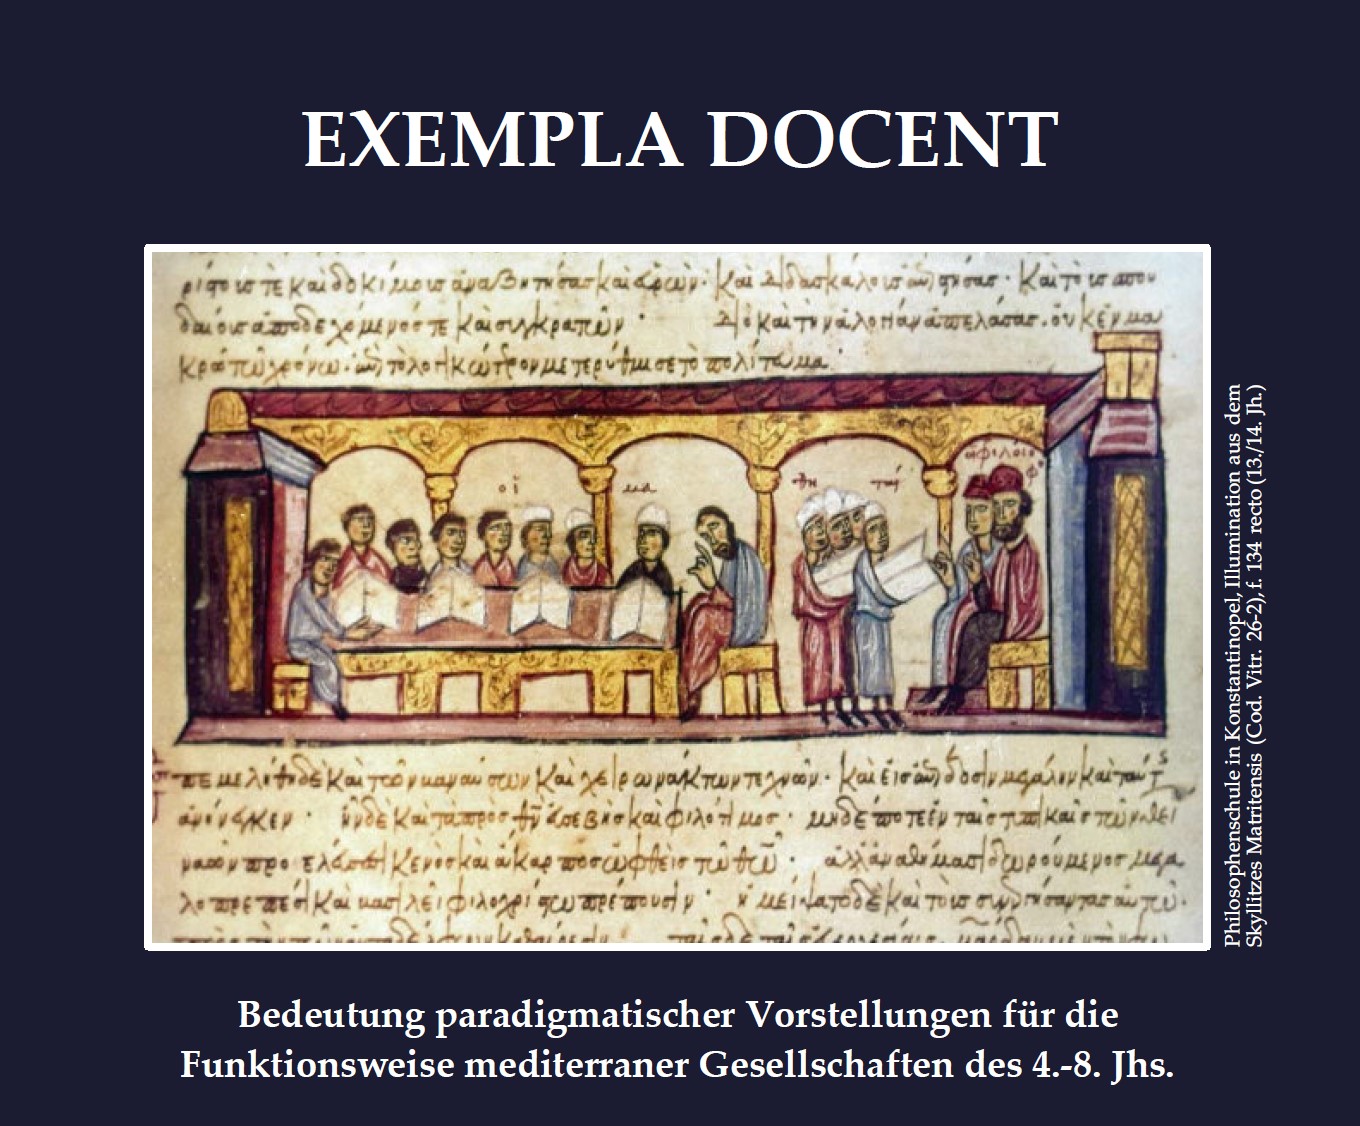 Exempla docent